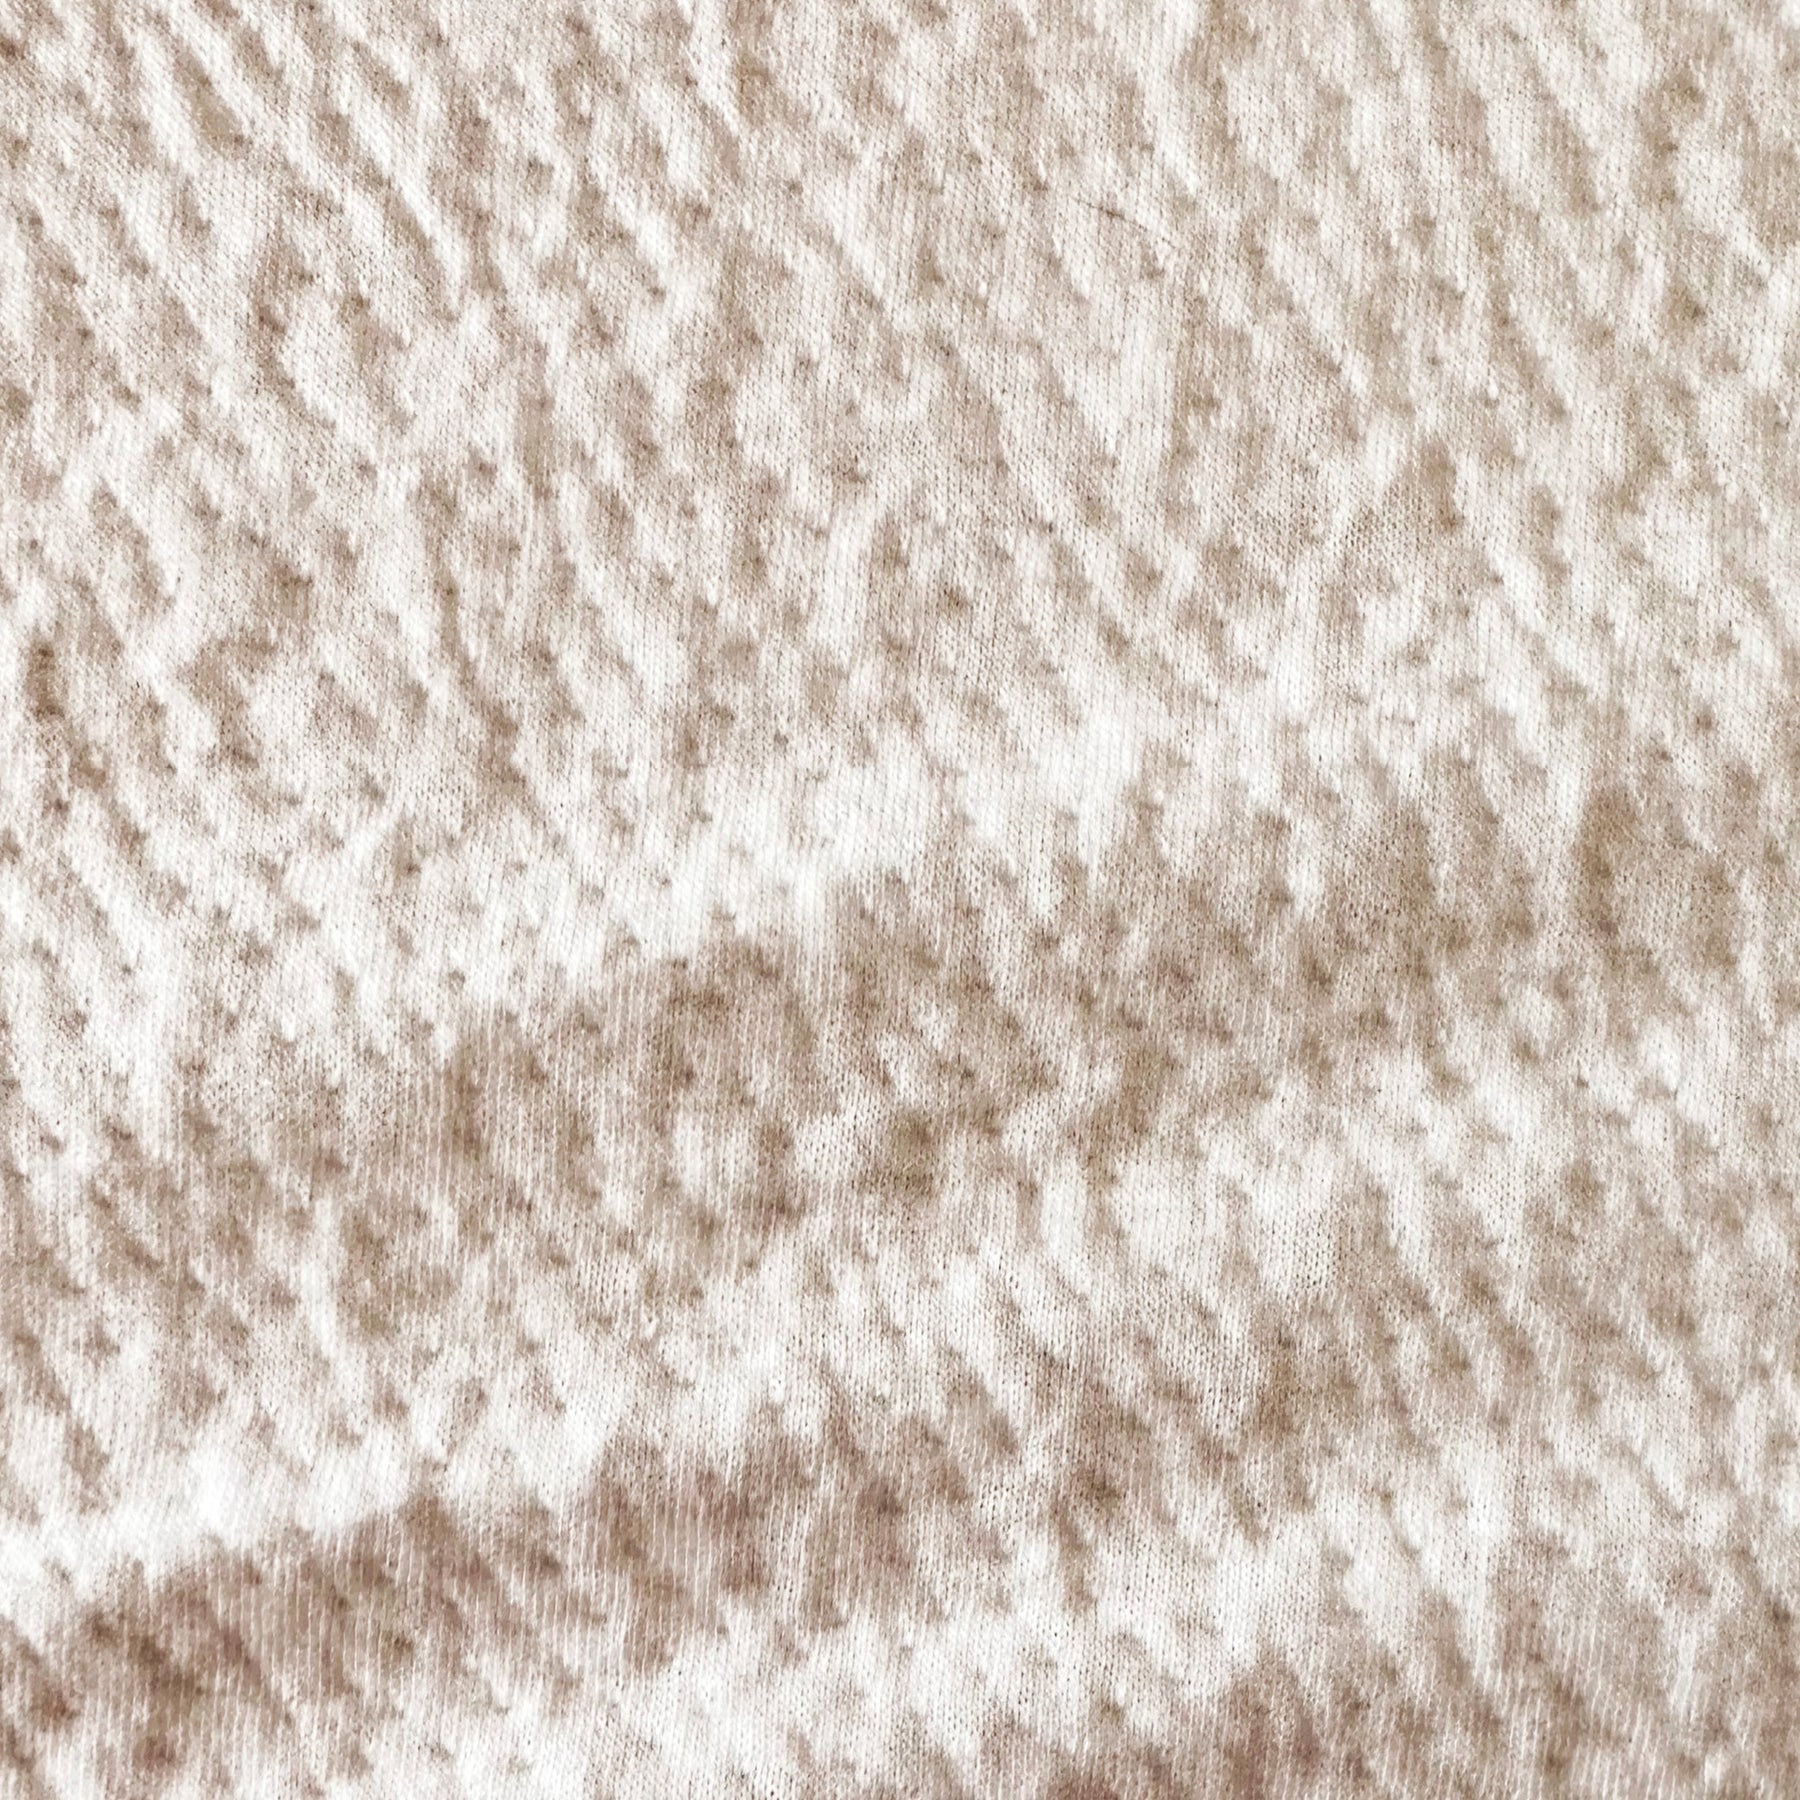 Close-up image of the texture of the Signature Pillow Protector